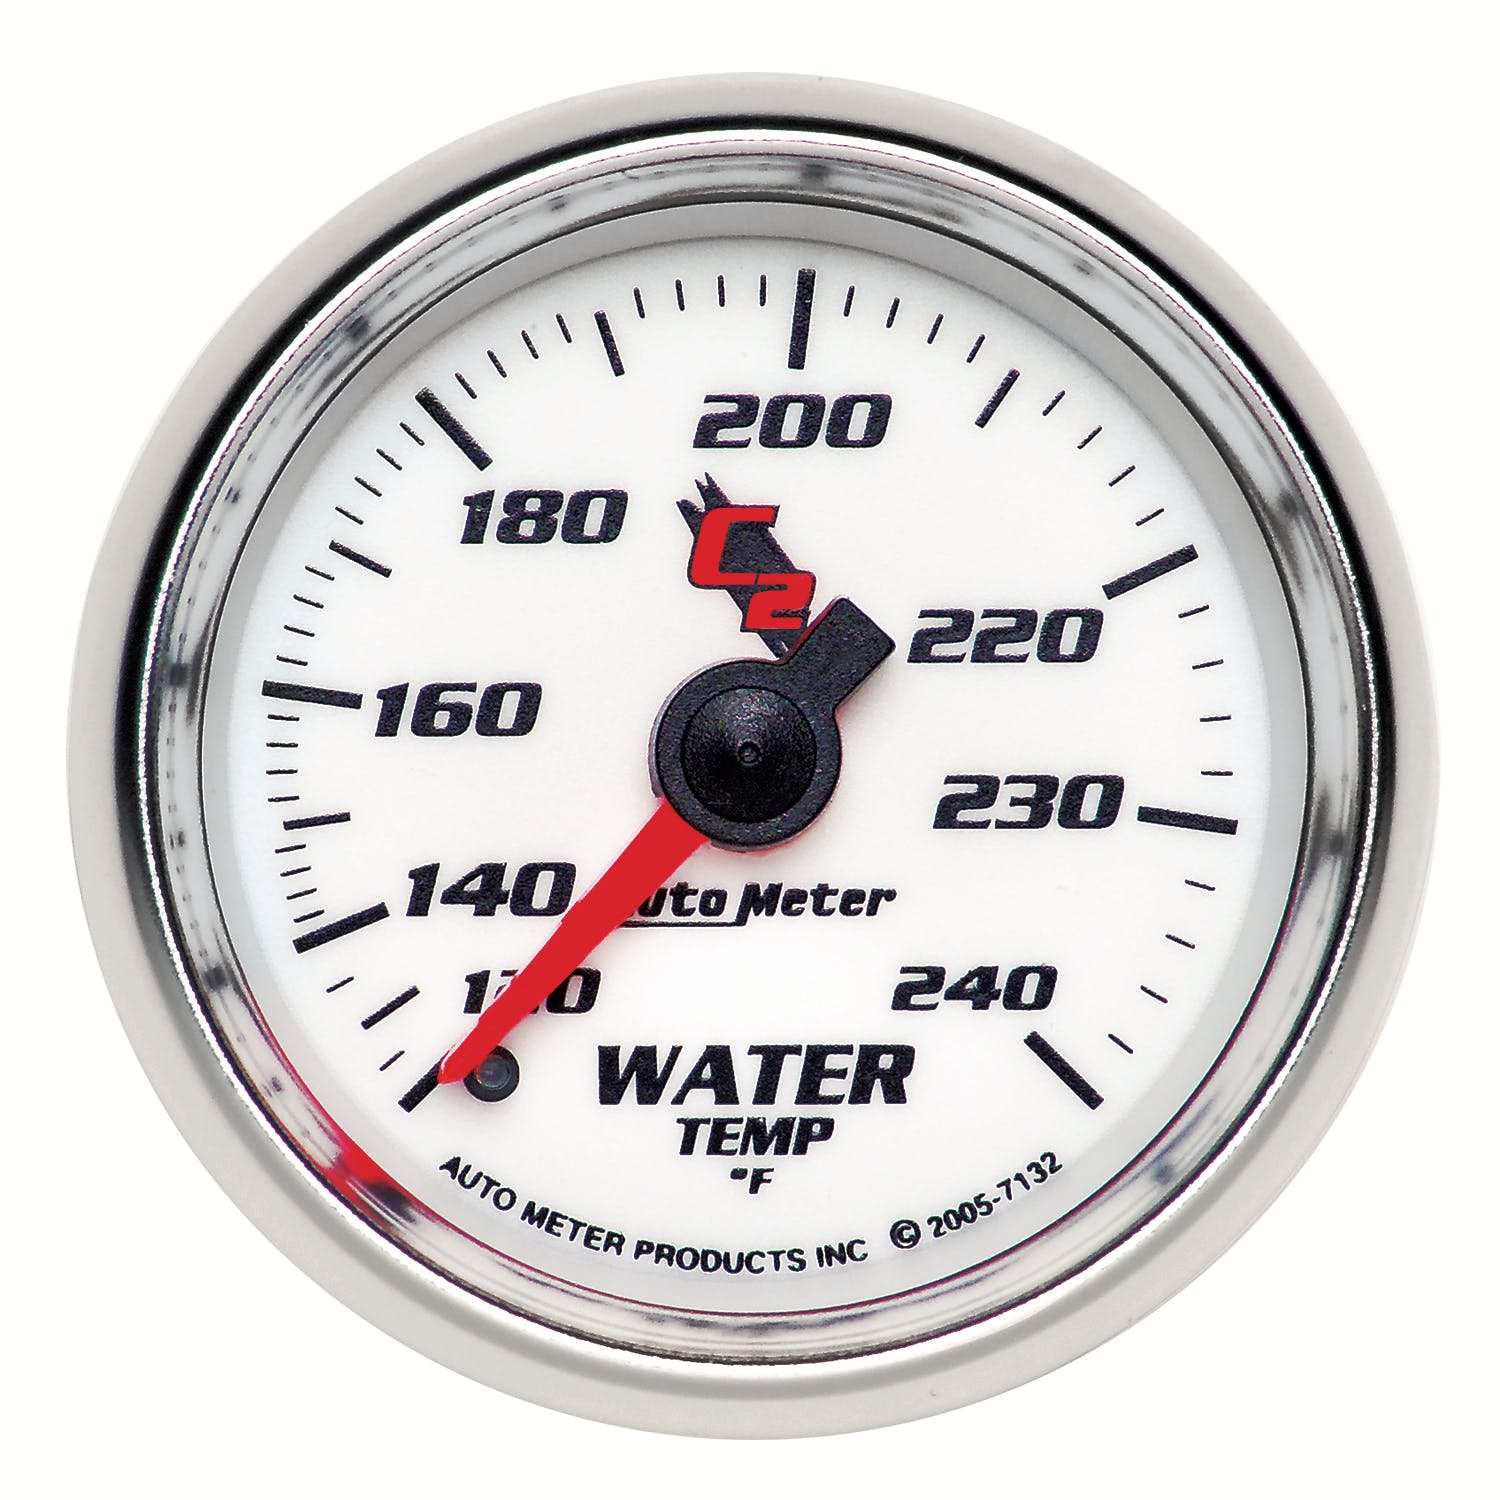 AutoMeter Products 7132 Water Temp 120-240 F